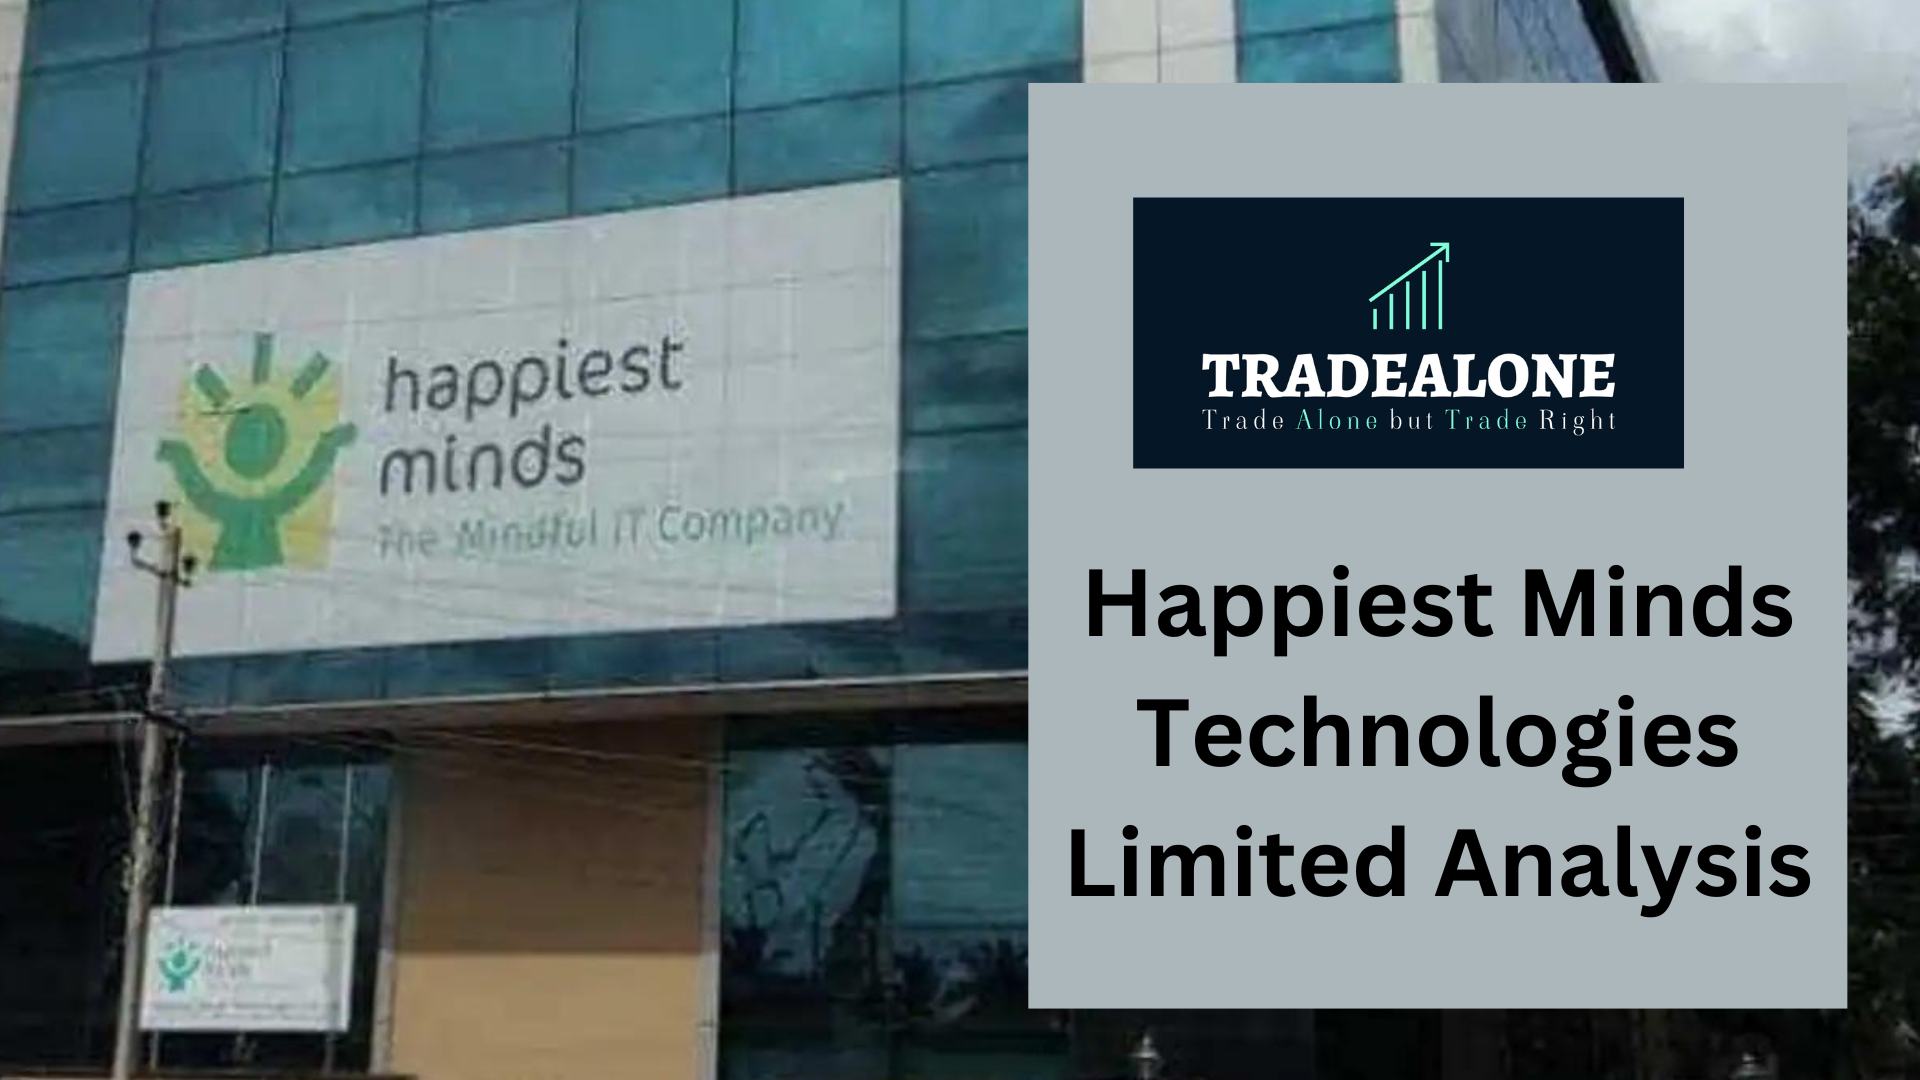 Happiest minds technologies limited analysis